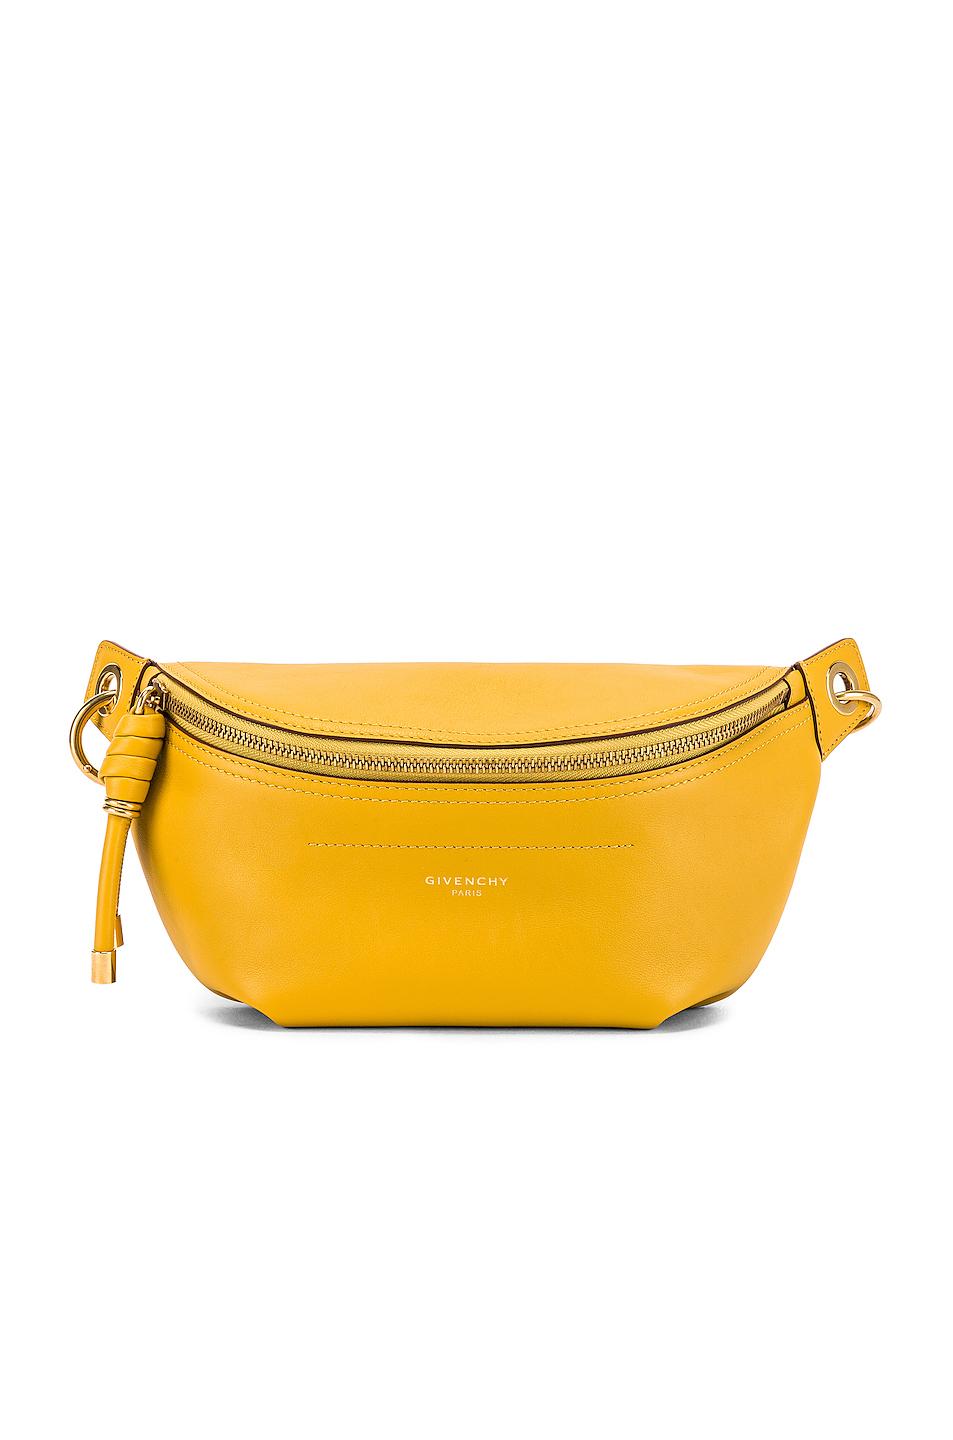 Givenchy Leather Whip Chain Belt Bag in Yellow - Lyst